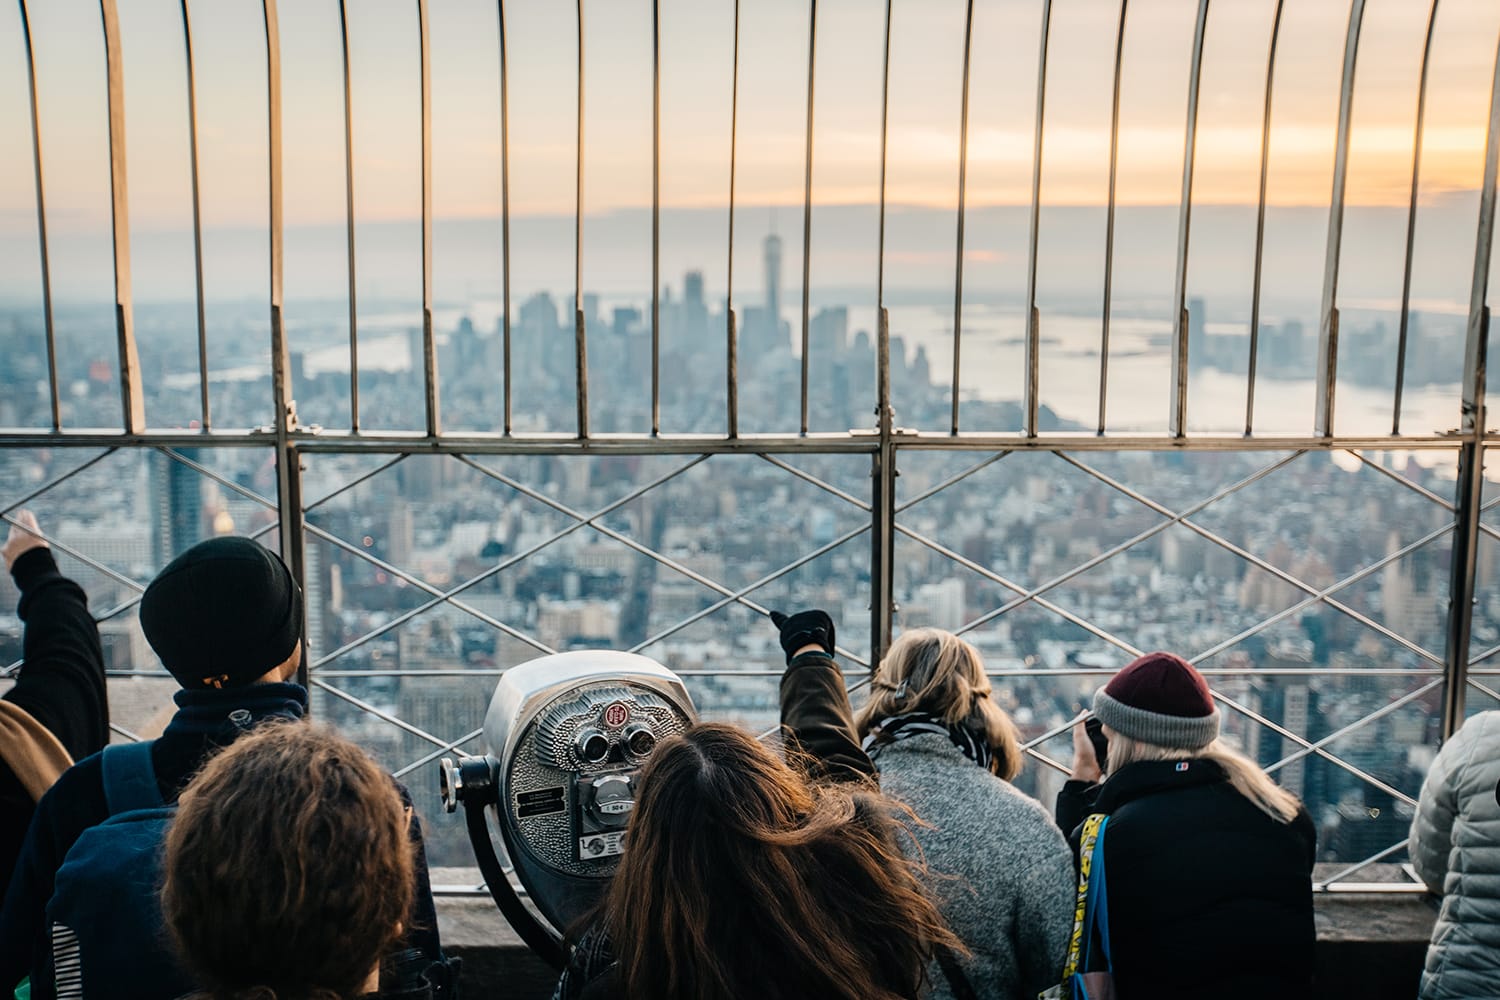 Tourists stand on the viewing platform at the Empire State Building looking at the city skyline